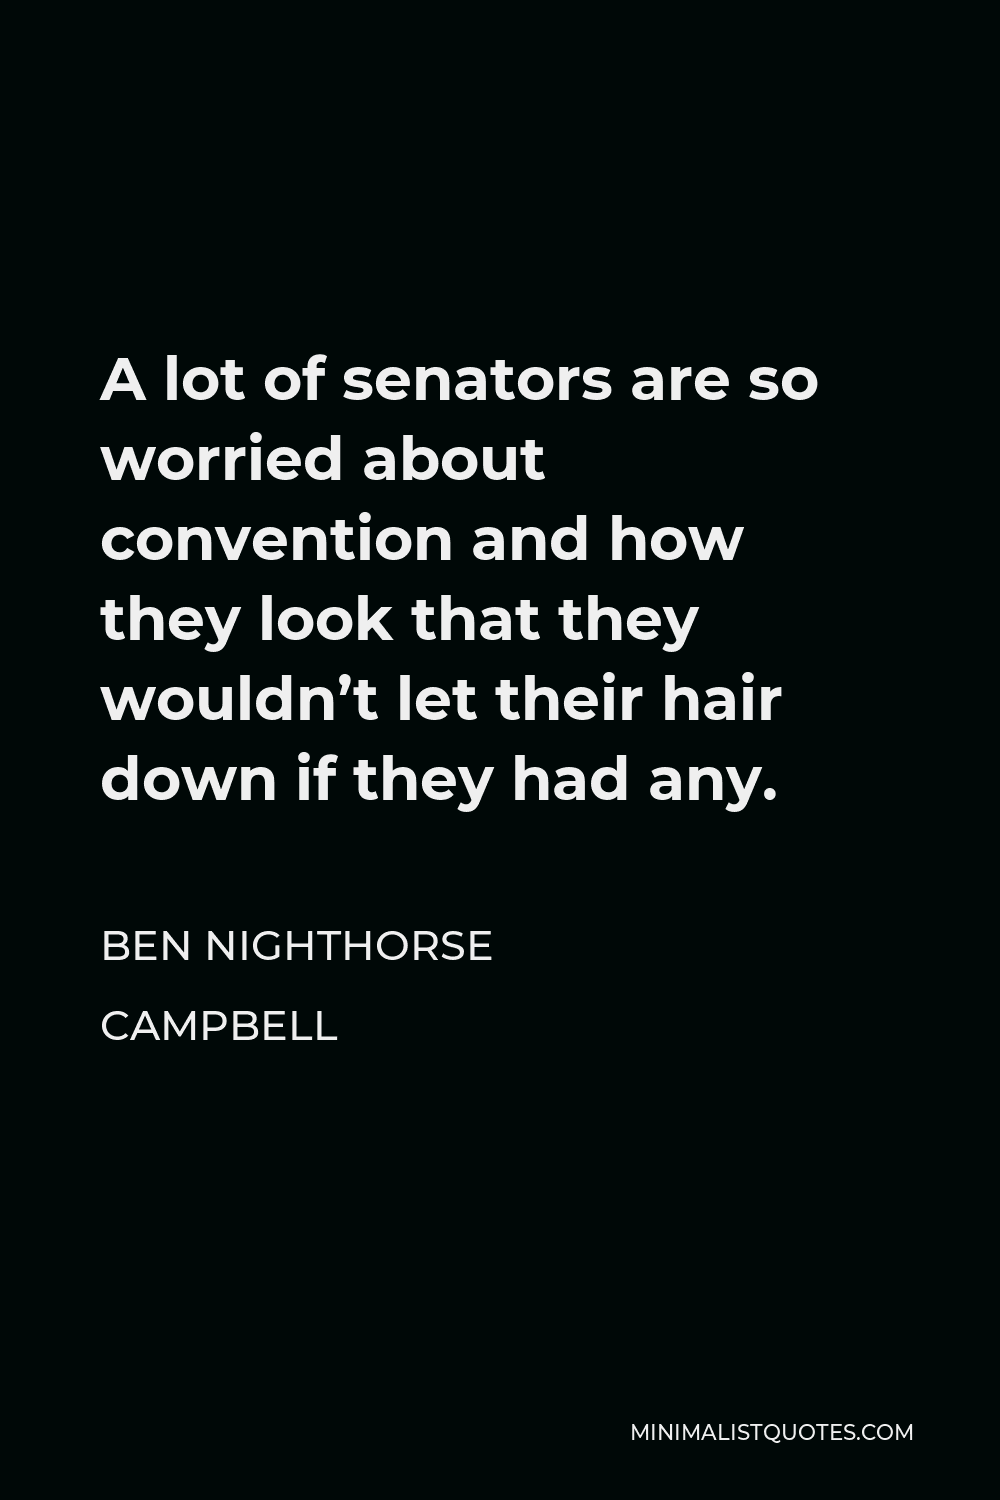 Ben Nighthorse Campbell Quote - A lot of senators are so worried about convention and how they look that they wouldn’t let their hair down if they had any.